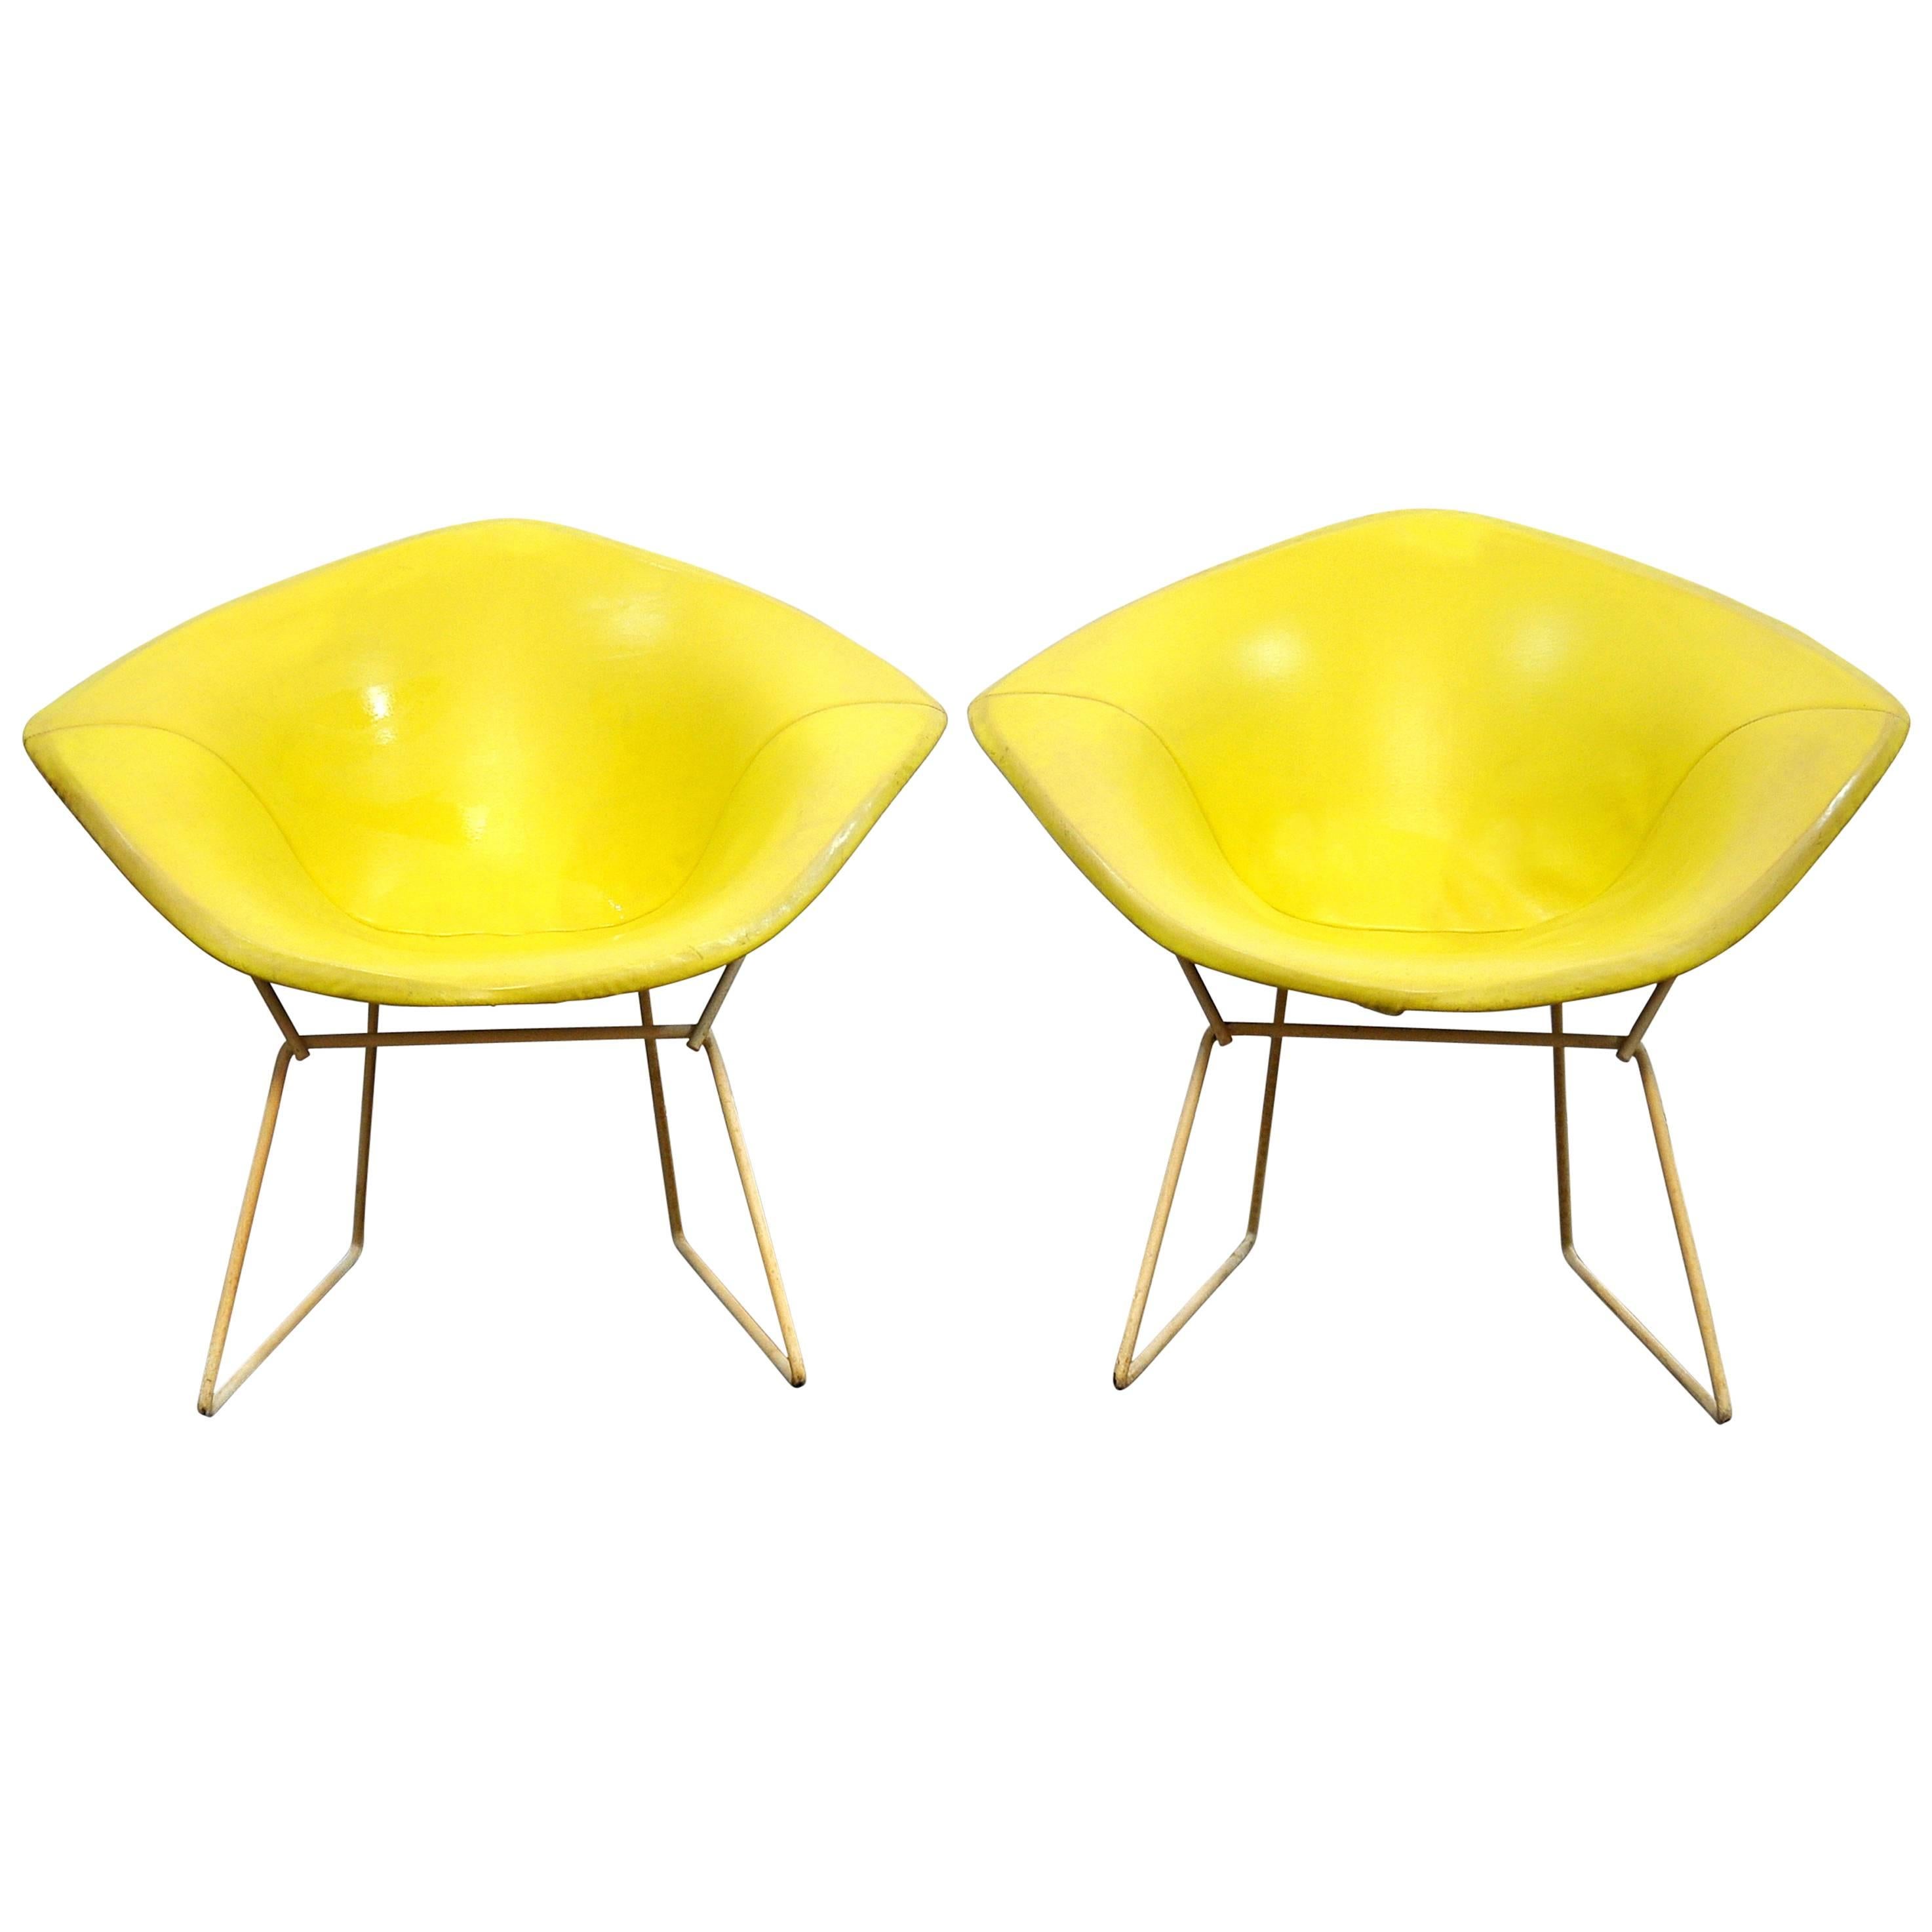 Early Pair of Bertoia for Knoll Associates Yellow Diamond Lounge Chairs, 1960s